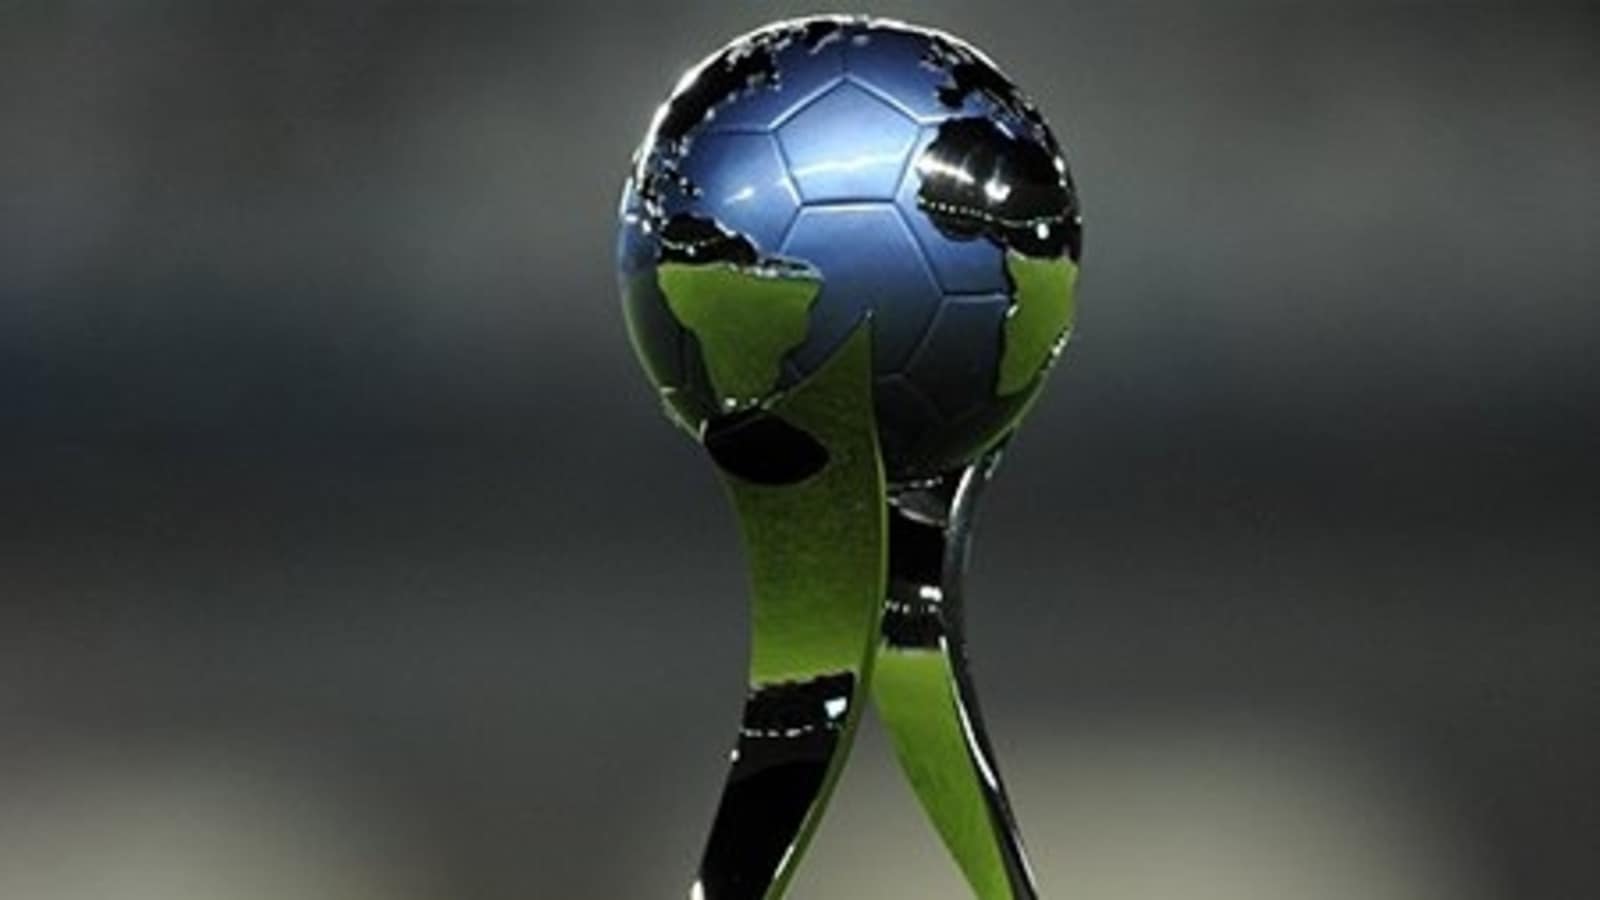 FIFA U-17 Women’s World Cup India 2022 set for official draw